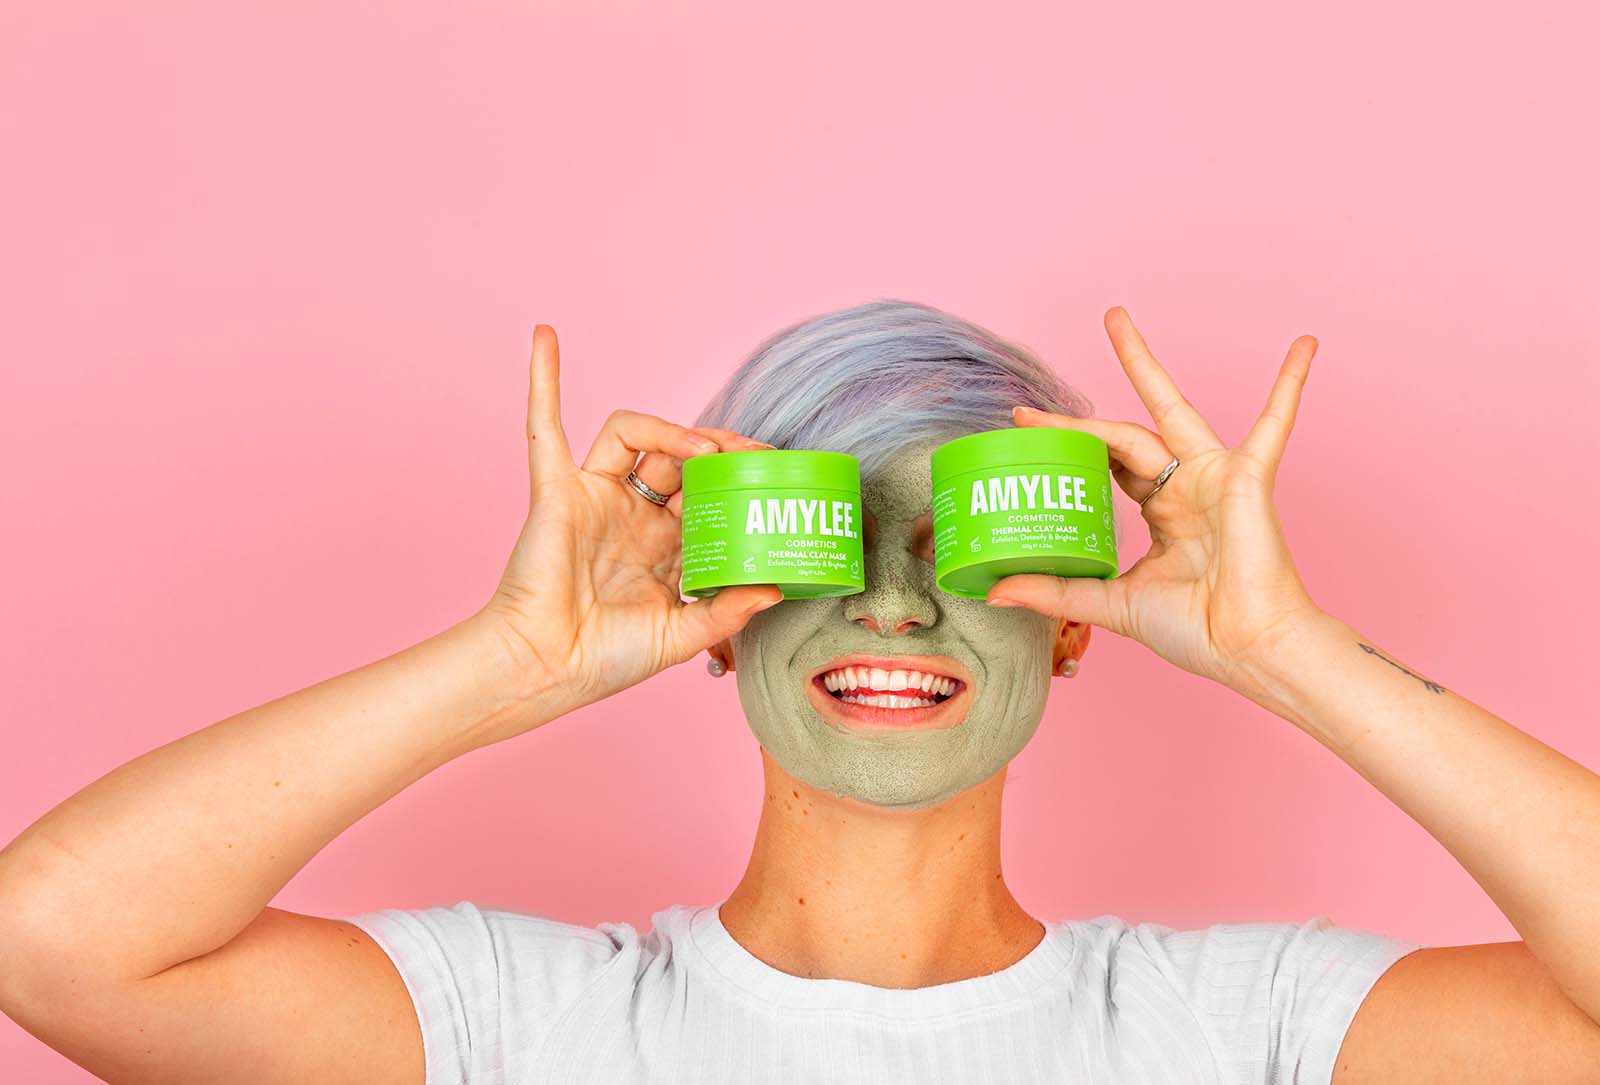 Bright Pink lifestyle product photos for a clay mask brand. Styled product photos by Megzie Makes